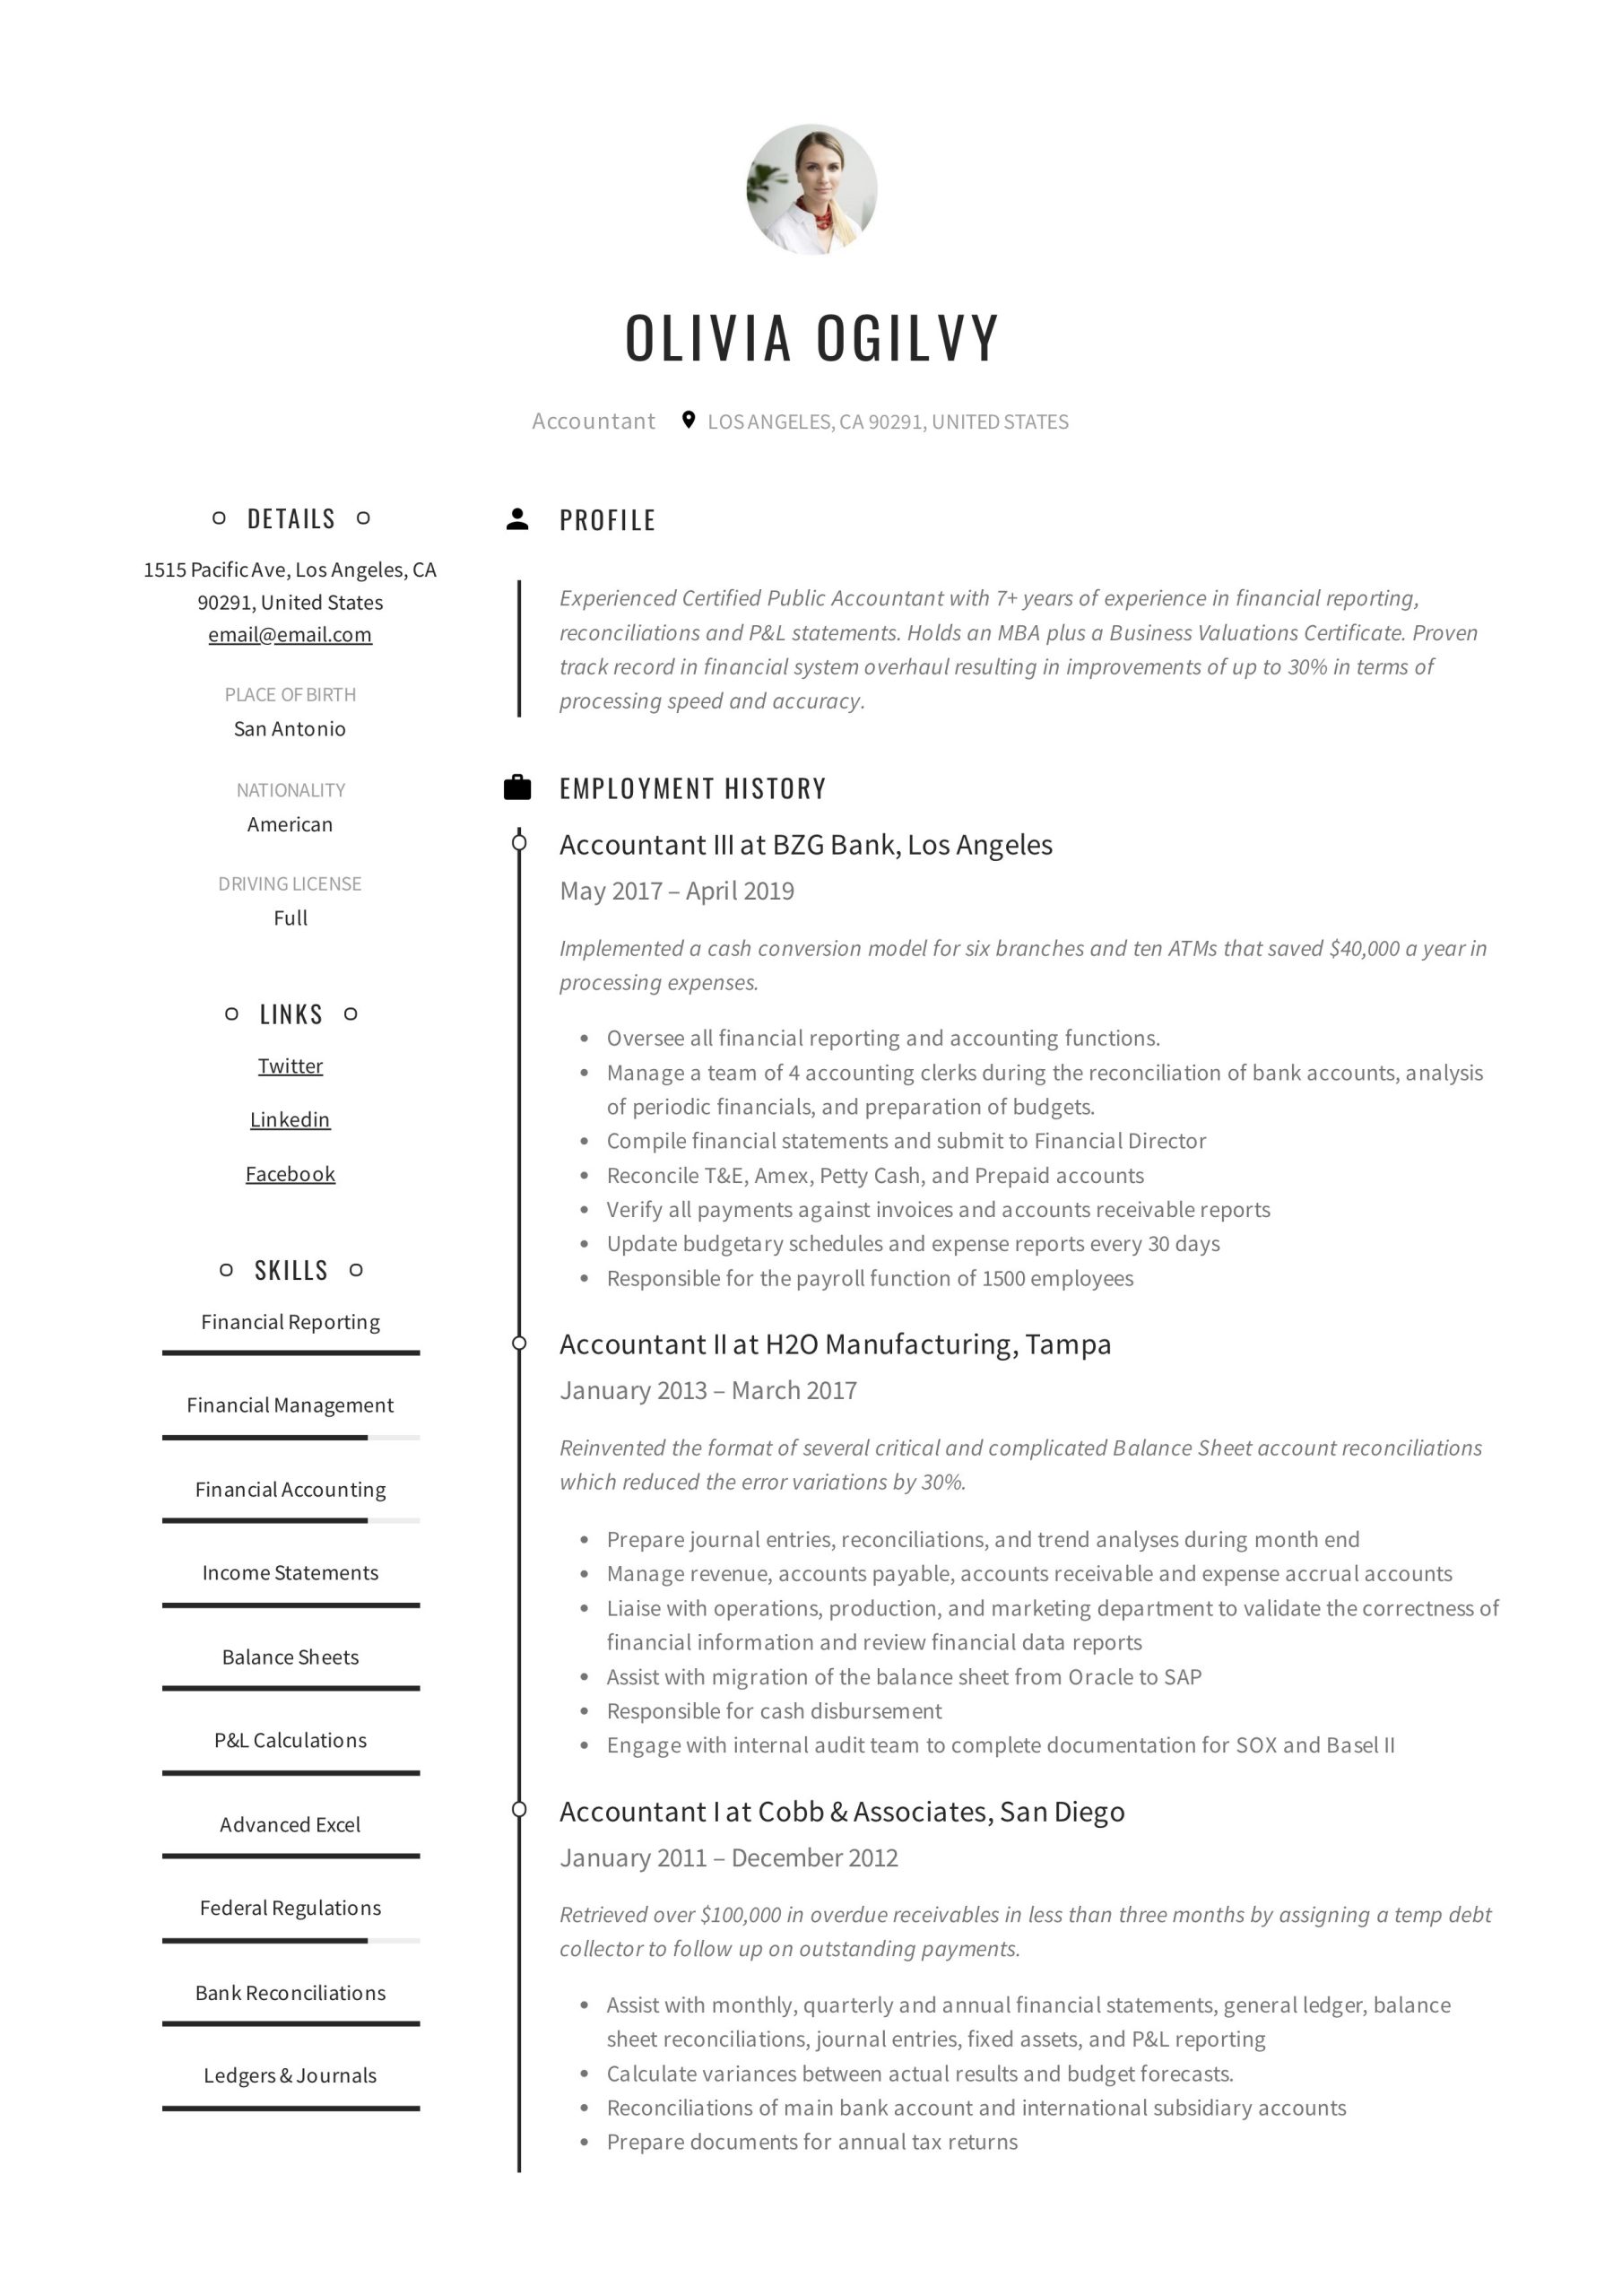 Sample Resume for Accontant Job In Usa Accountant Resume & Writing Guide 19 Templates 2022